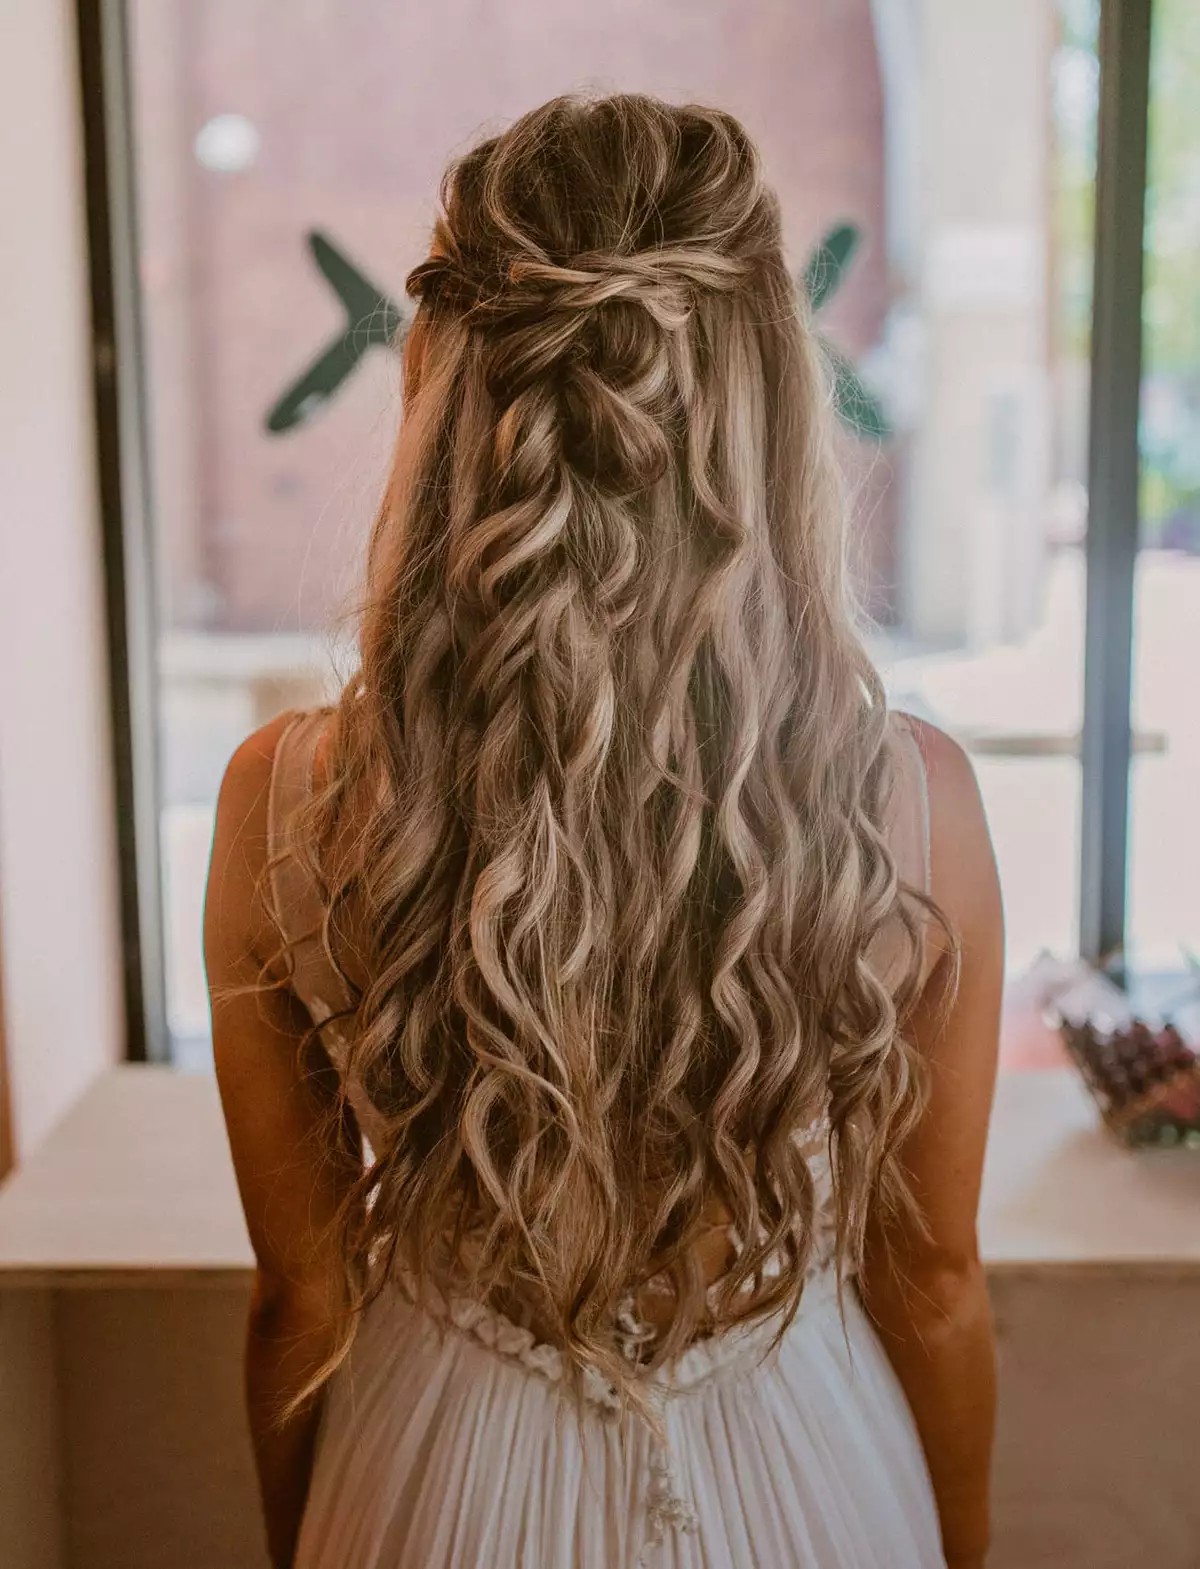 From Milkmaid Braids To Old Hollywood Waves: Here Are 35 Beautiful Wedding Hairstyles Ideas For Brides With Long Hair